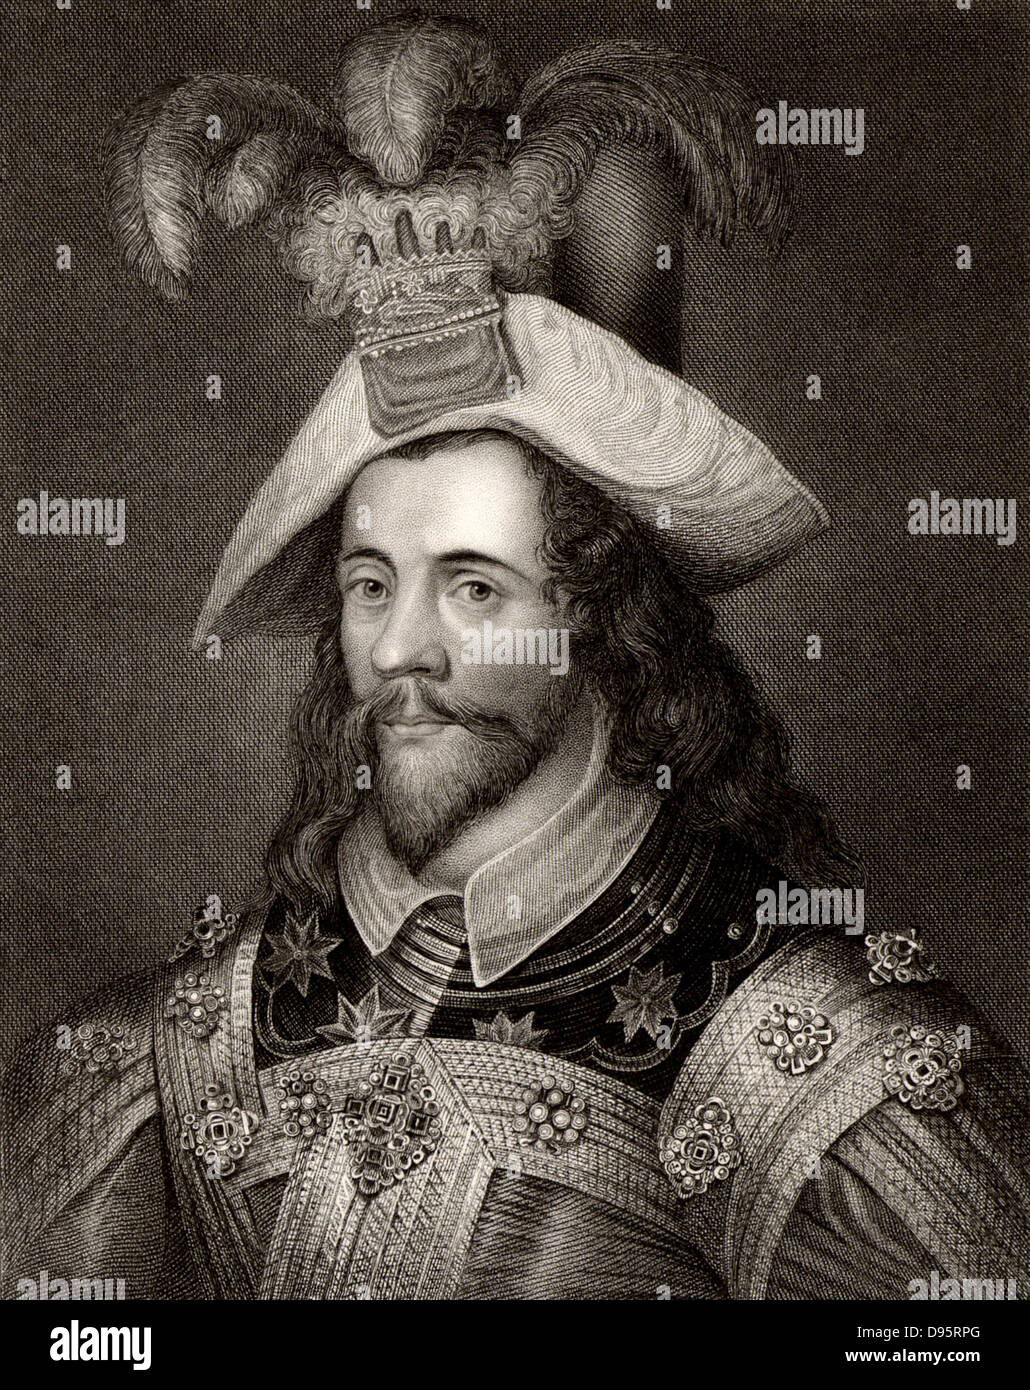 George Clifford (1558-1605) 3rd Earl of Cumberland. English courtier, naval commander and privateer. Engraving. Stock Photo